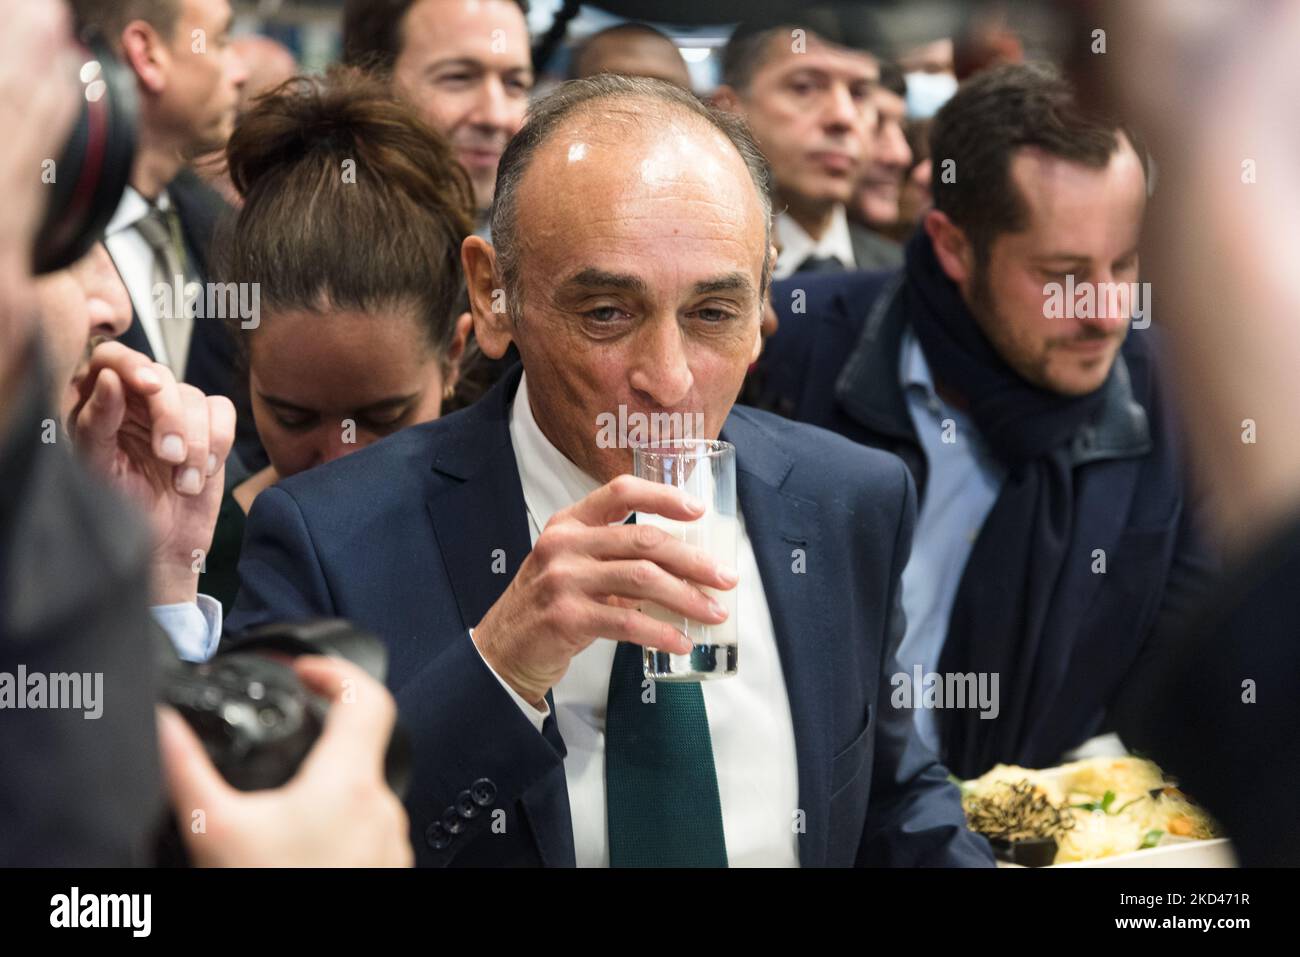 Eric Zemmour, polemical candidate in the French presidential election for the far-right Reconquest (R!) party, is touring the exhibitors' stands and drinking a glass of milk during the traditional stroll of the presidential candidates at the International Agricultural Show currently being held at the Parc des expositions de la Porte de Versailles in Paris in order to meet with producers, breeders and the French people on March 4, 2022. (Photo by Samuel Boivin/NurPhoto) Stock Photo